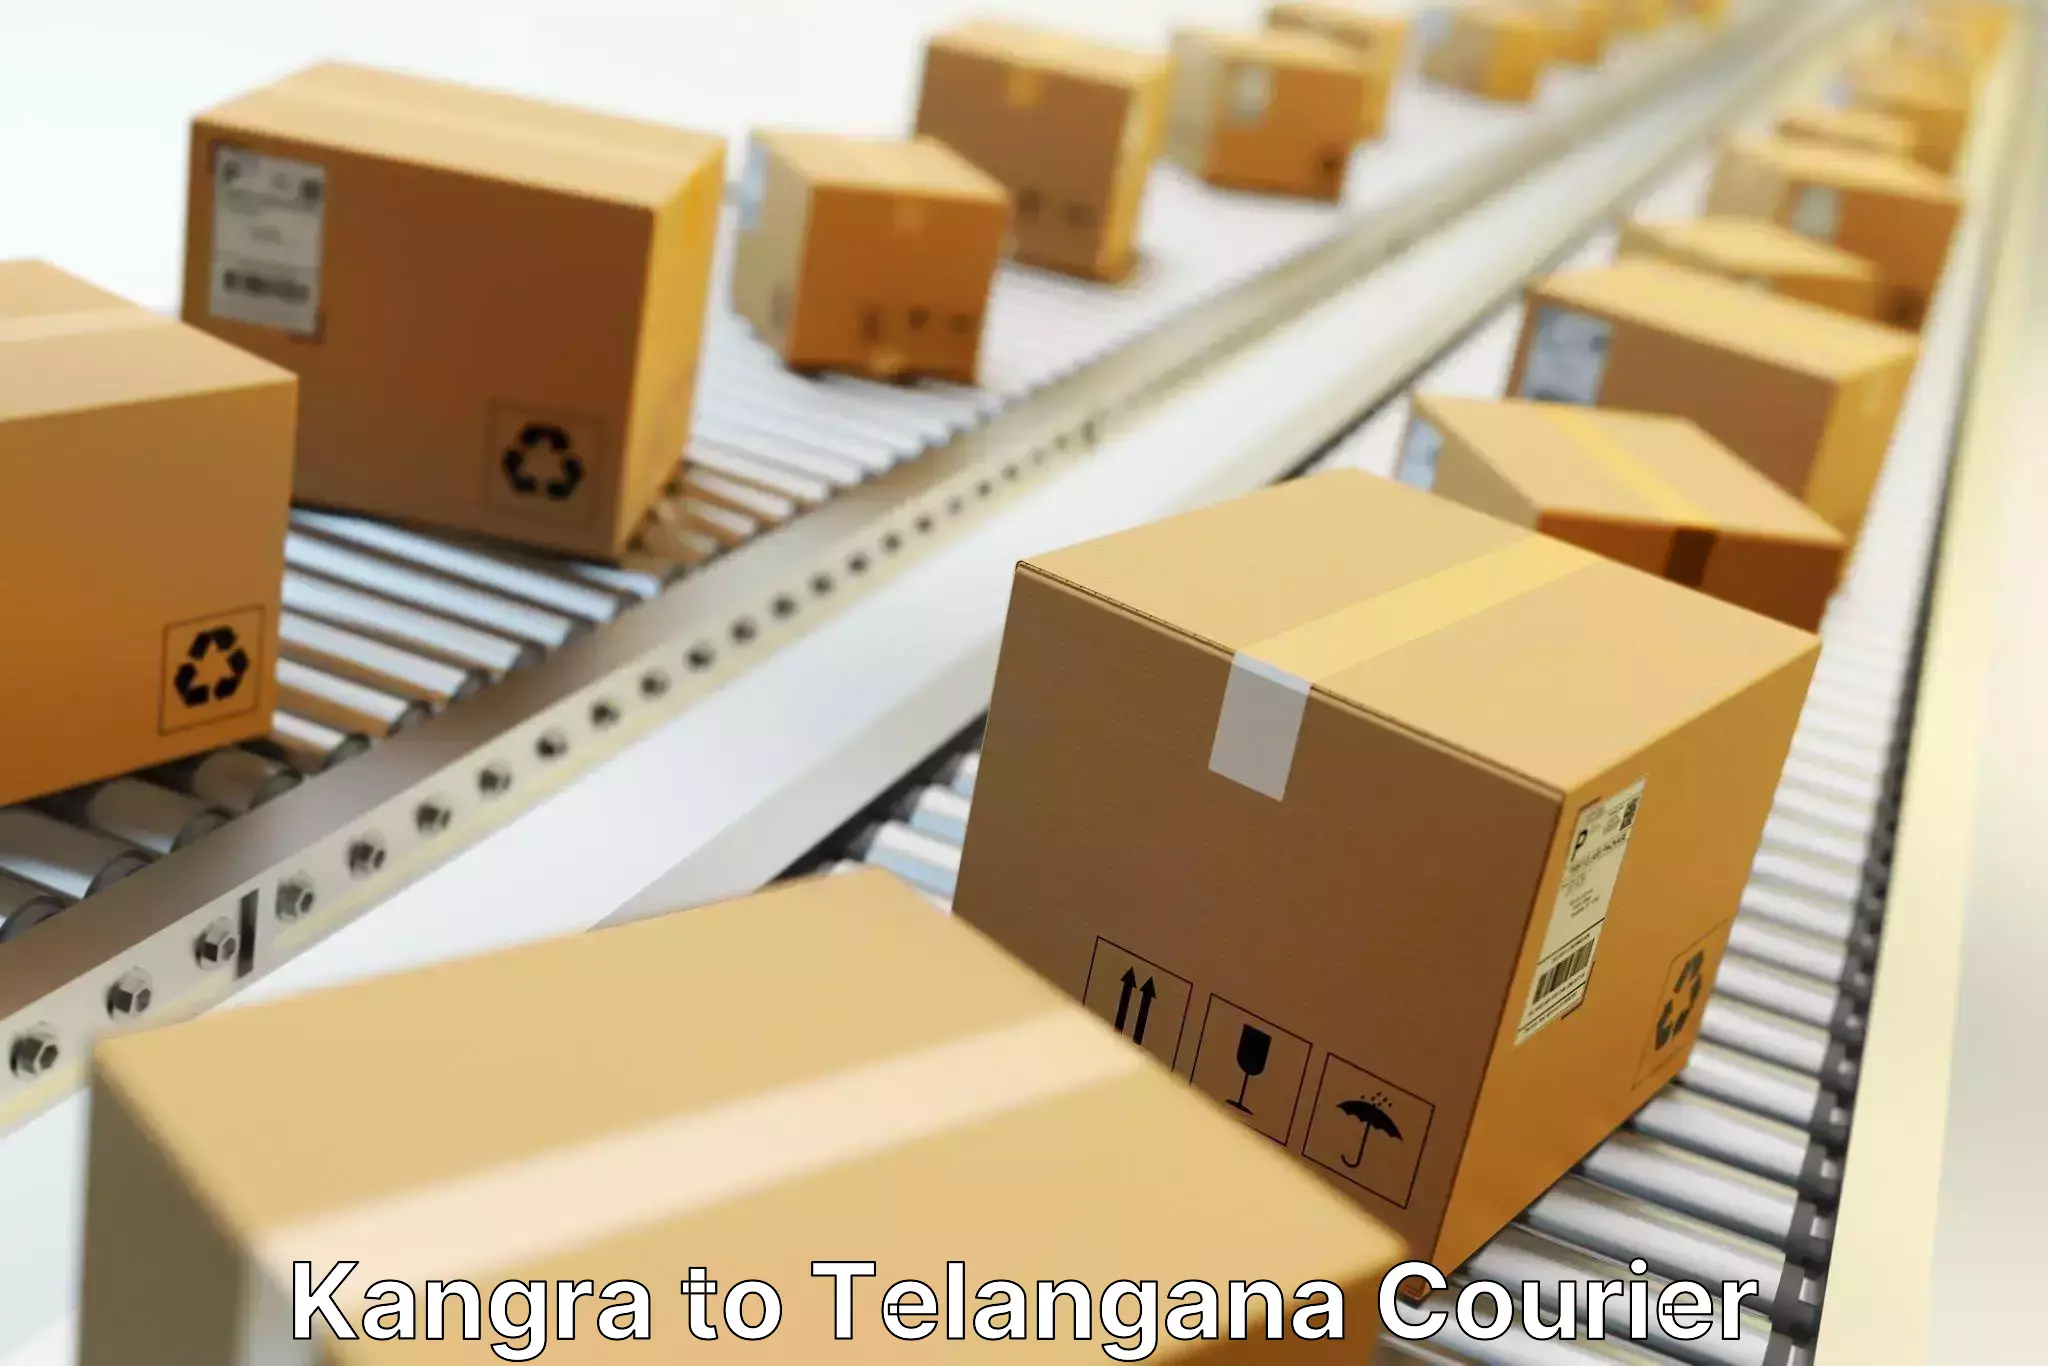 Customer-focused courier Kangra to Mominpet